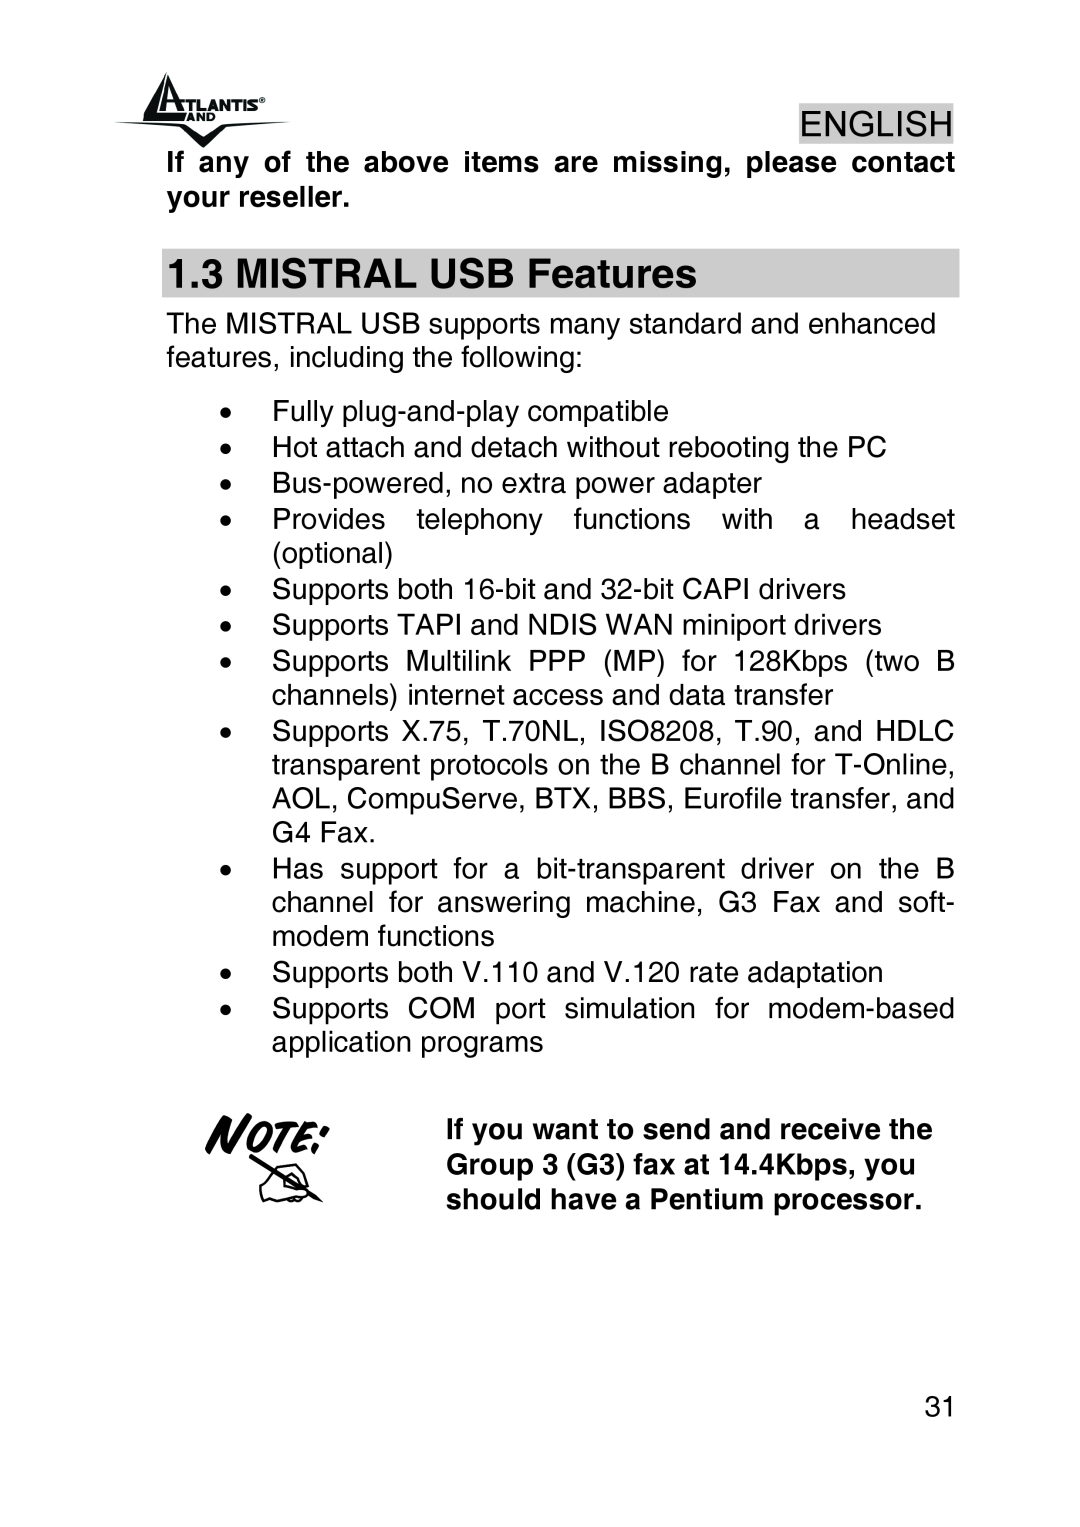 Atlantis Land A01-IU1 manual MISTRAL USB Features, If any of the above items are missing, please contact your reseller 